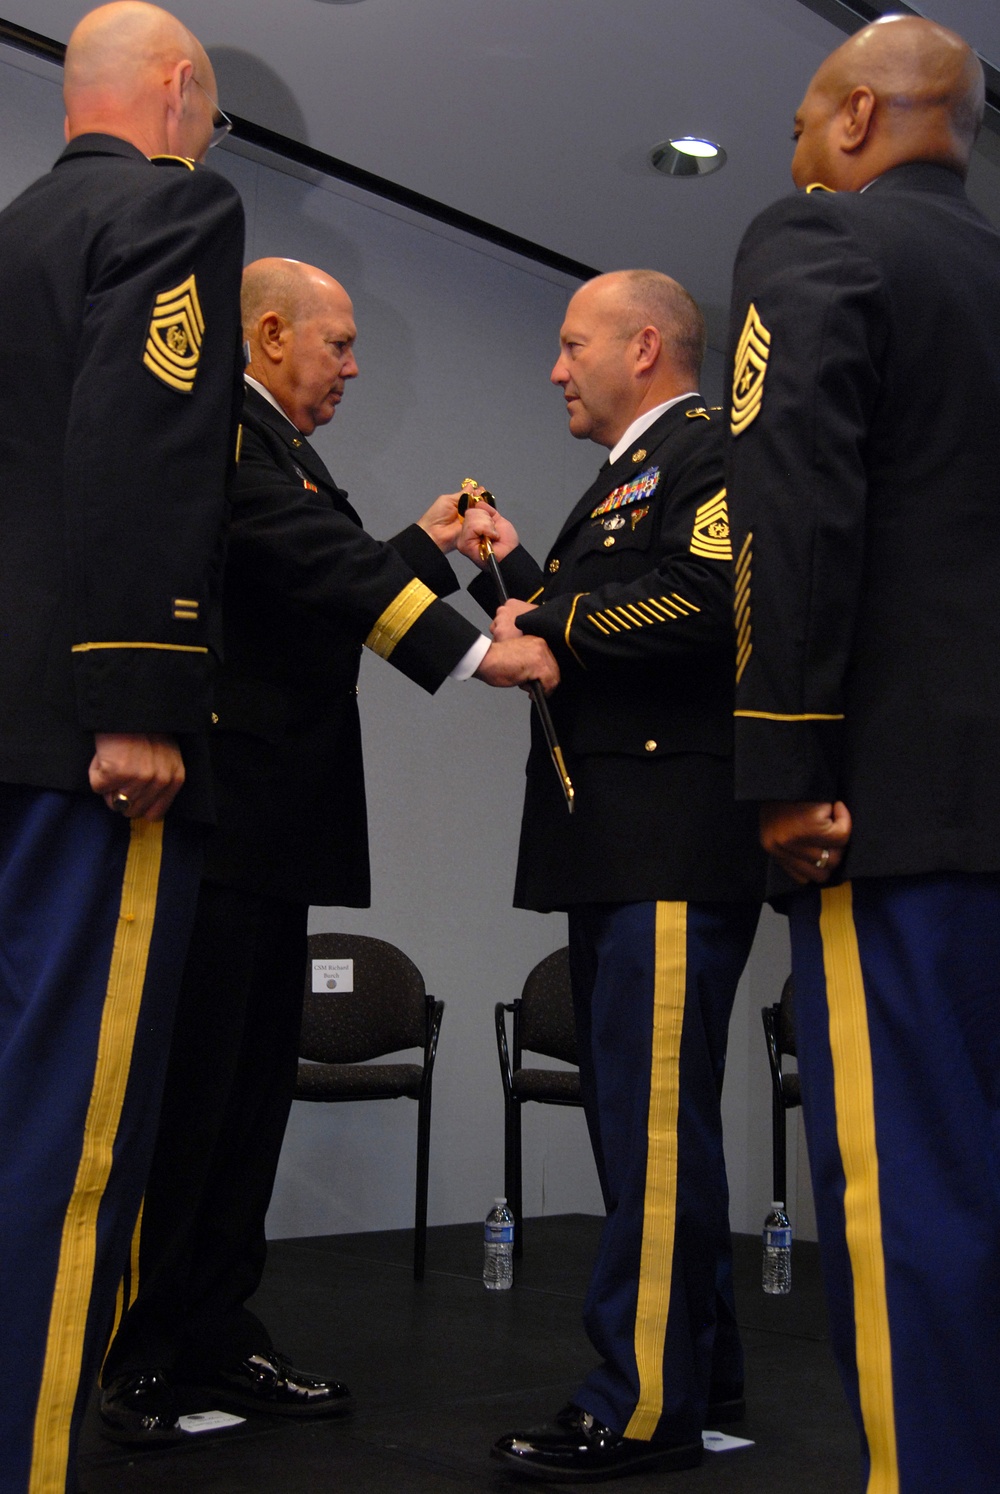 Conley takes reins as 10 command sergeant major of the Army National Guard